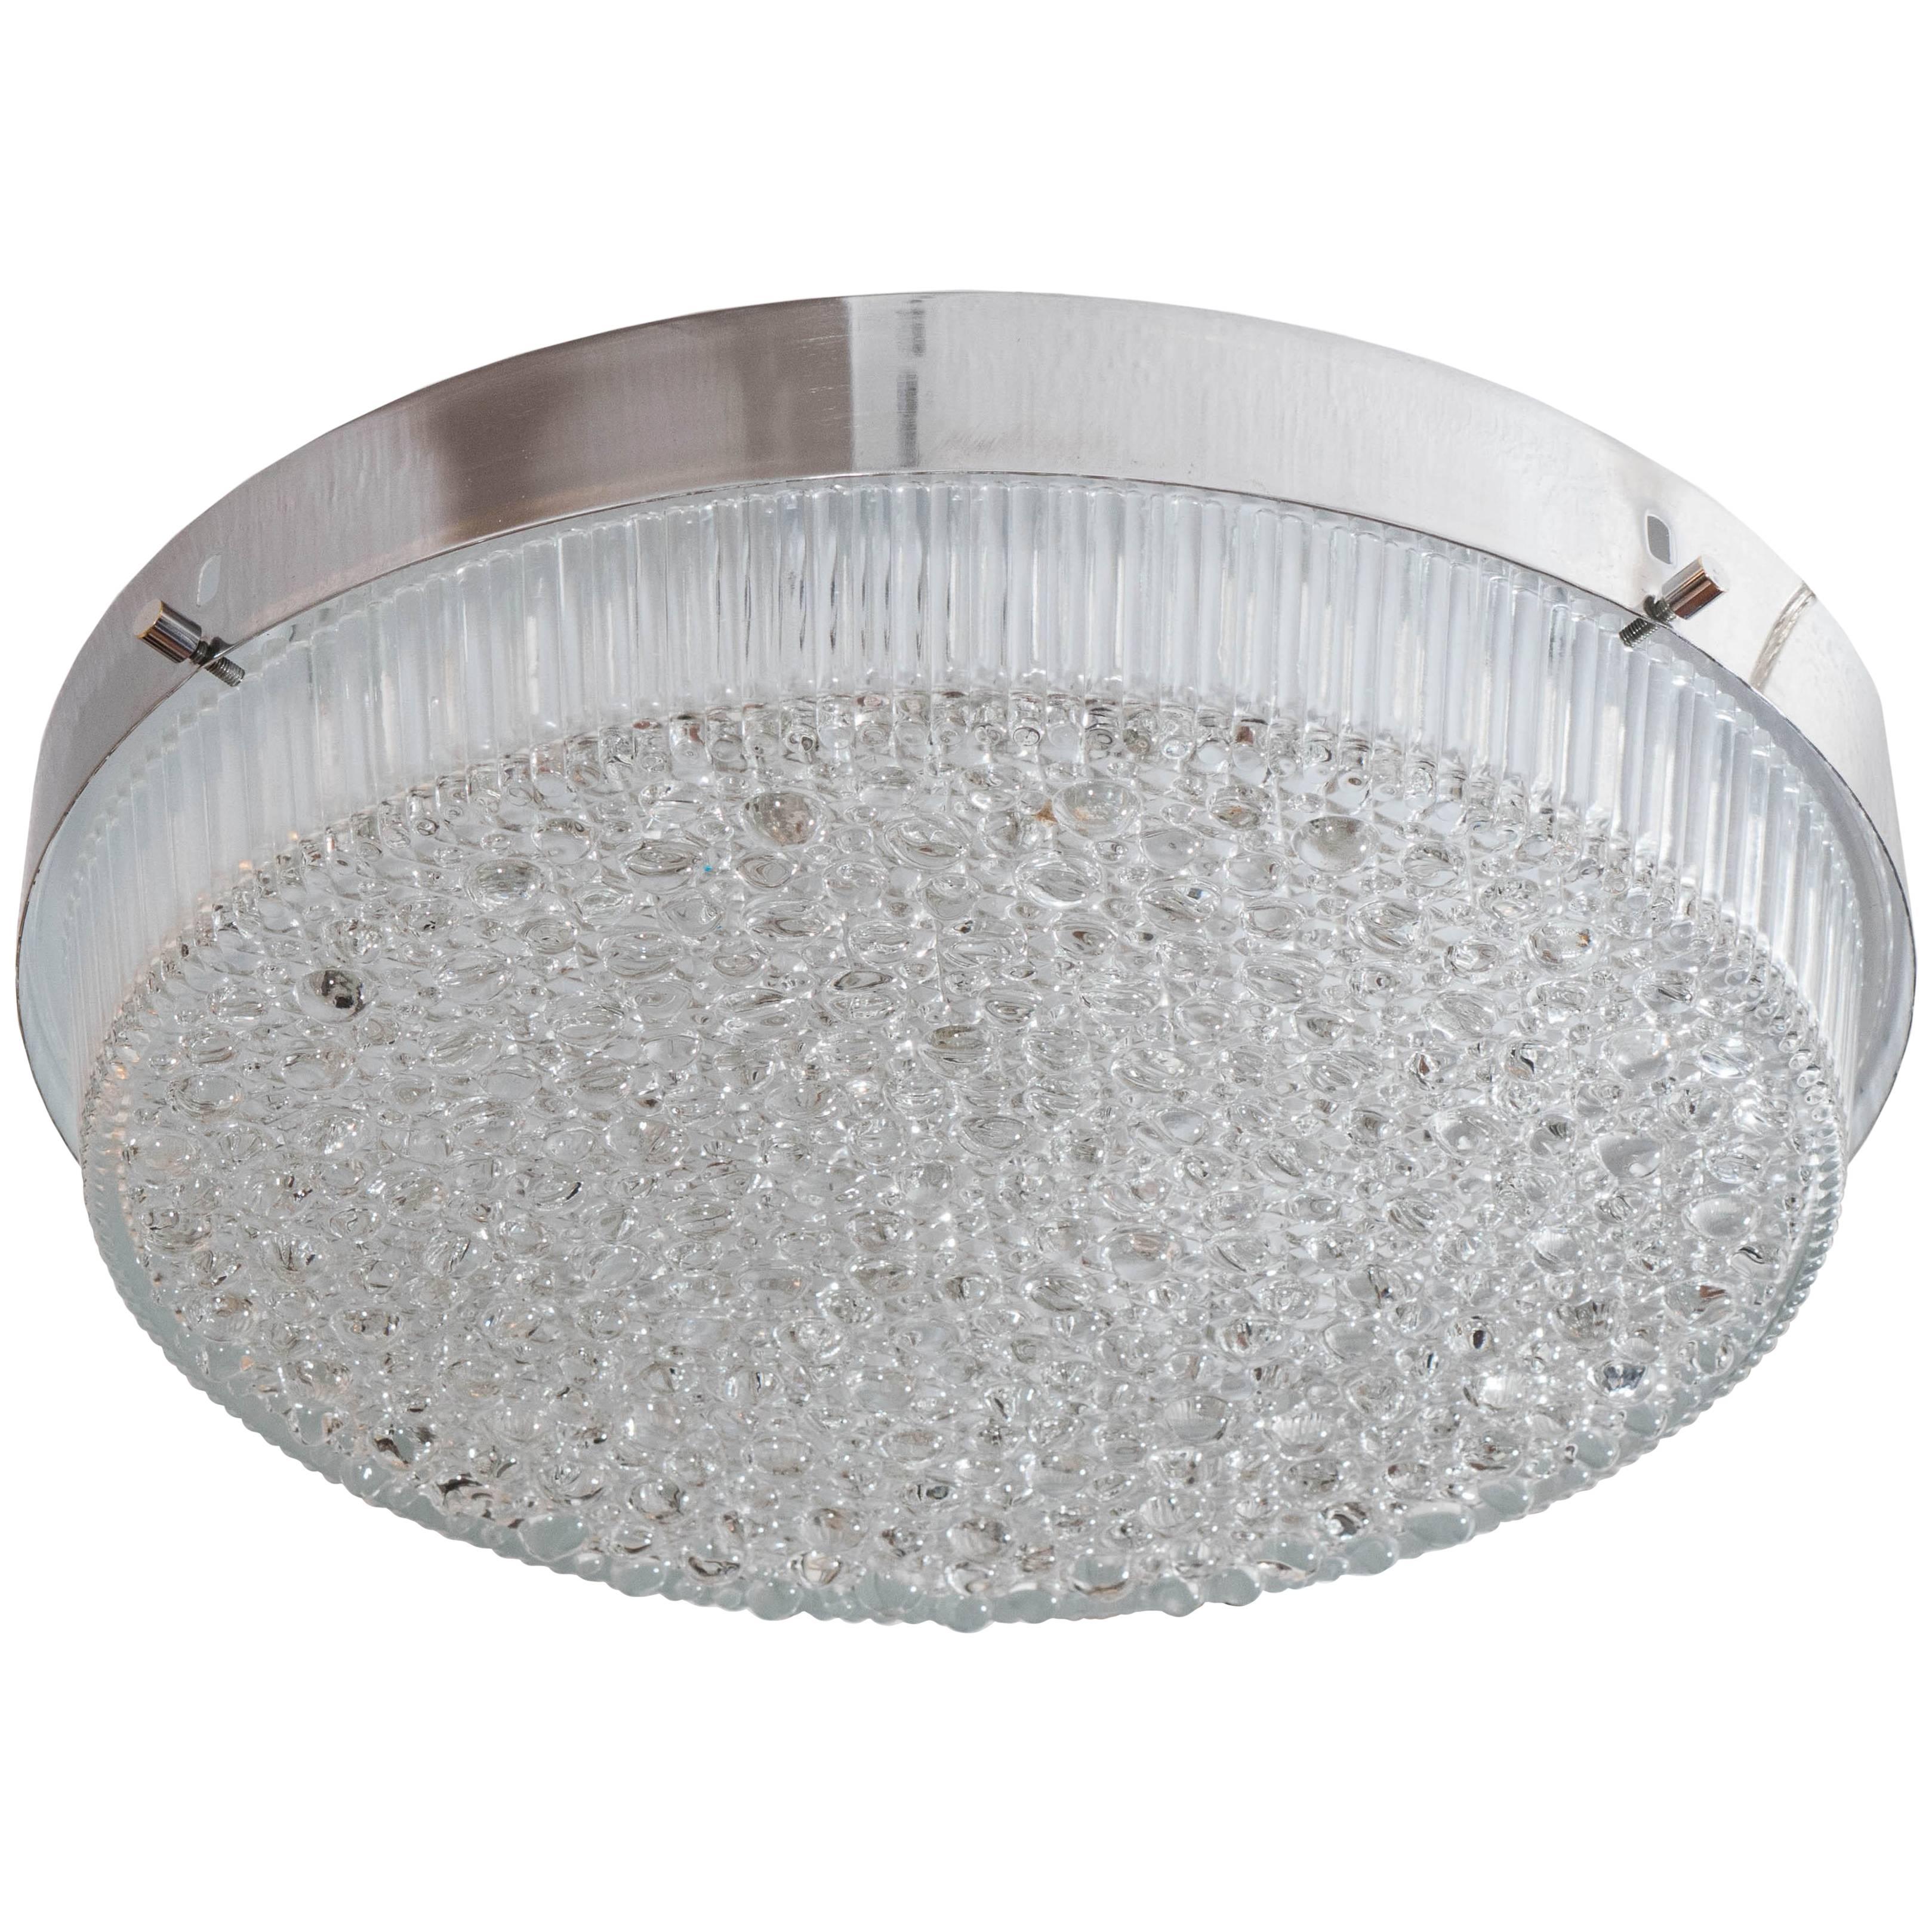 Round Polished Nickel Flush Mount Fixtures For Sale